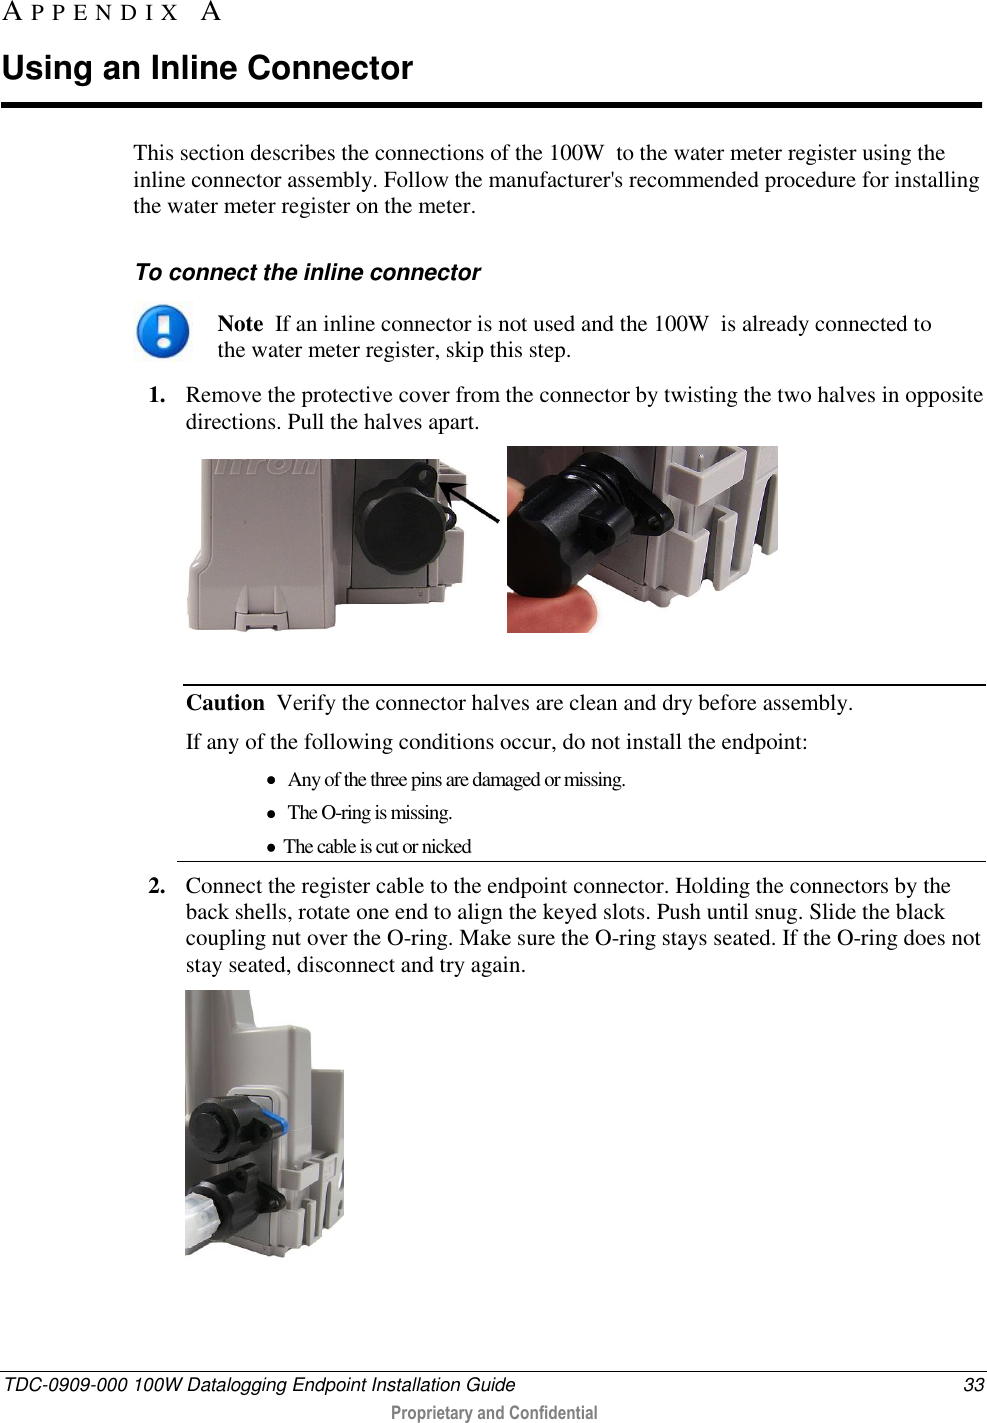  TDC-0909-000 100W Datalogging Endpoint Installation Guide  33  Proprietary and Confidential  This section describes the connections of the 100W  to the water meter register using the inline connector assembly. Follow the manufacturer&apos;s recommended procedure for installing the water meter register on the meter.  To connect the inline connector  Note  If an inline connector is not used and the 100W  is already connected to the water meter register, skip this step. 1. Remove the protective cover from the connector by twisting the two halves in opposite directions. Pull the halves apart.     Caution  Verify the connector halves are clean and dry before assembly. If any of the following conditions occur, do not install the endpoint:   Any of the three pins are damaged or missing.  The O-ring is missing.  The cable is cut or nicked 2. Connect the register cable to the endpoint connector. Holding the connectors by the back shells, rotate one end to align the keyed slots. Push until snug. Slide the black coupling nut over the O-ring. Make sure the O-ring stays seated. If the O-ring does not stay seated, disconnect and try again.   AP P E N D I X   A  Using an Inline Connector 